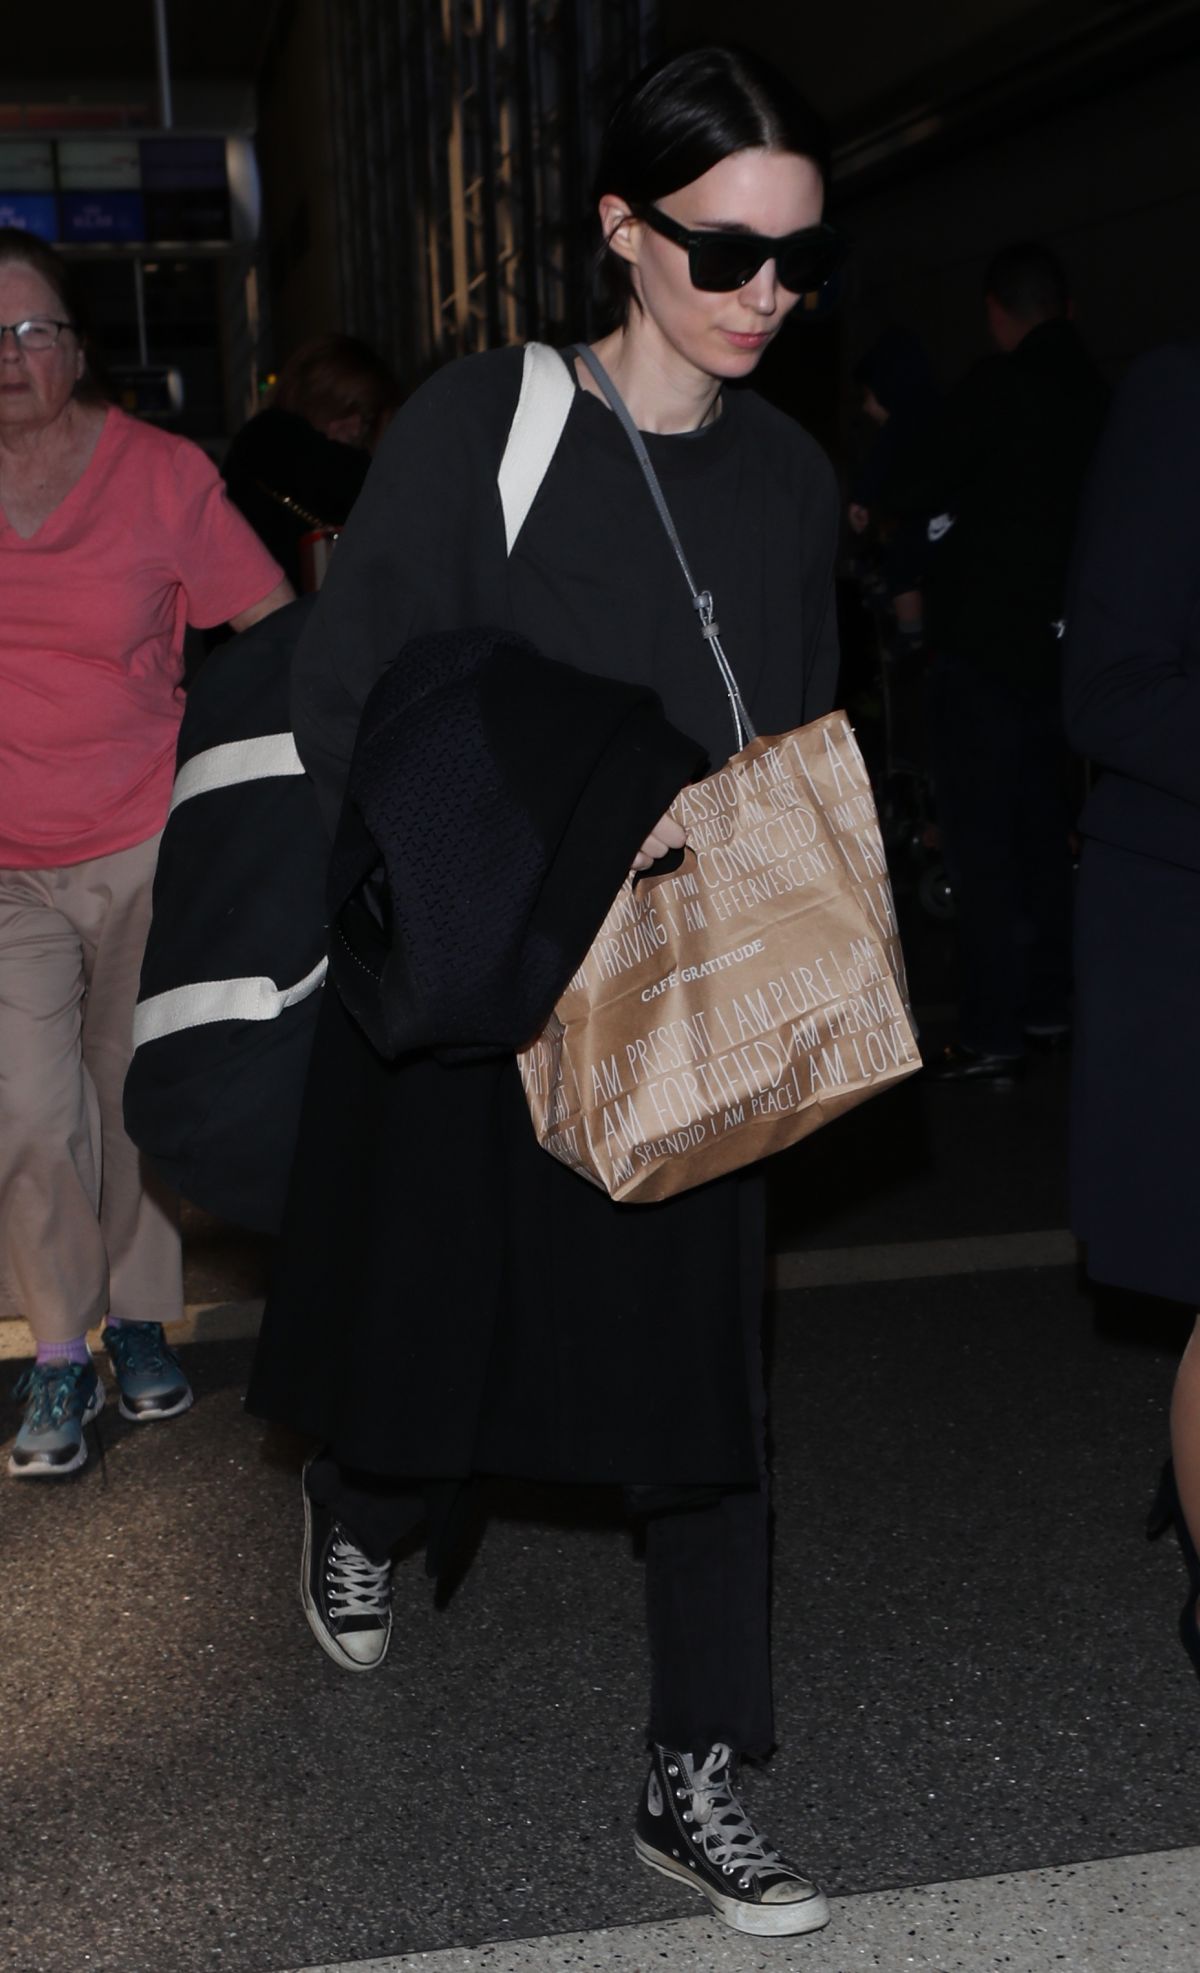 ROONEY MARA at LAX Airport in Los Angeles 03/05/2018 – HawtCelebs